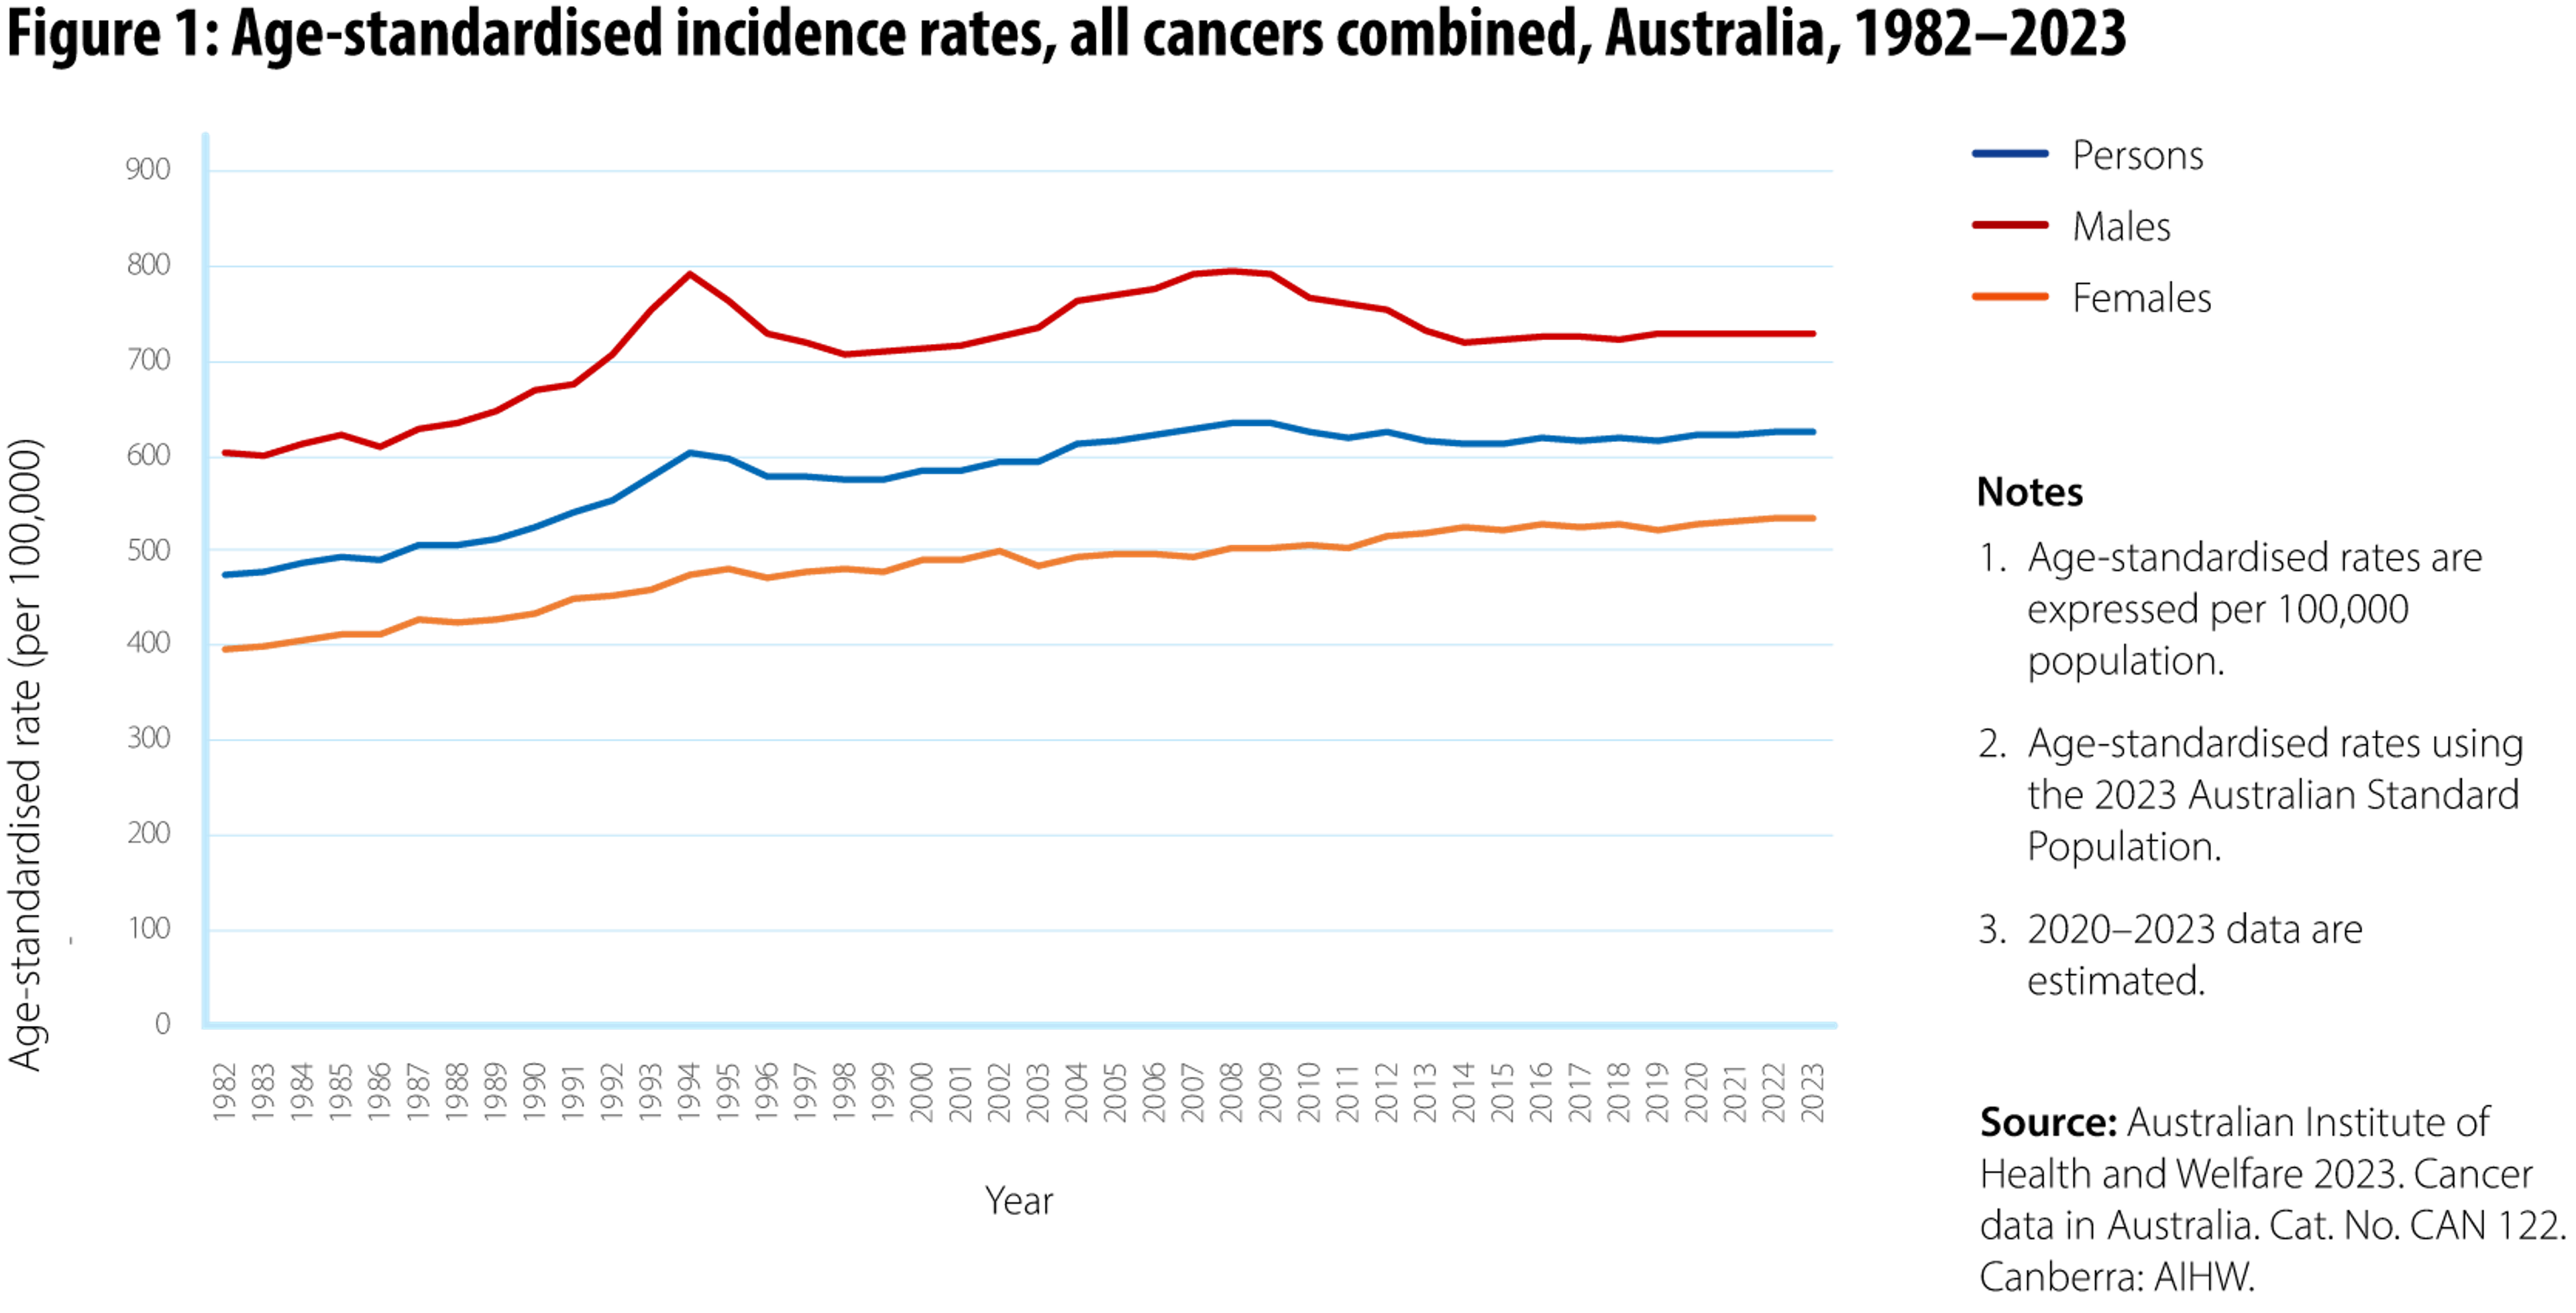 Figure 1: Line graph showing age-standardised incidence rates for all cancers combined that are diagnosed in Australia between 1982 and 2022. Incidence rates are shown on three separate lines – one for males, one for females, and one for all persons combined. This graph shows that incidence rates over this period have increased. Incidence rates are consistently higher for males than those for females.